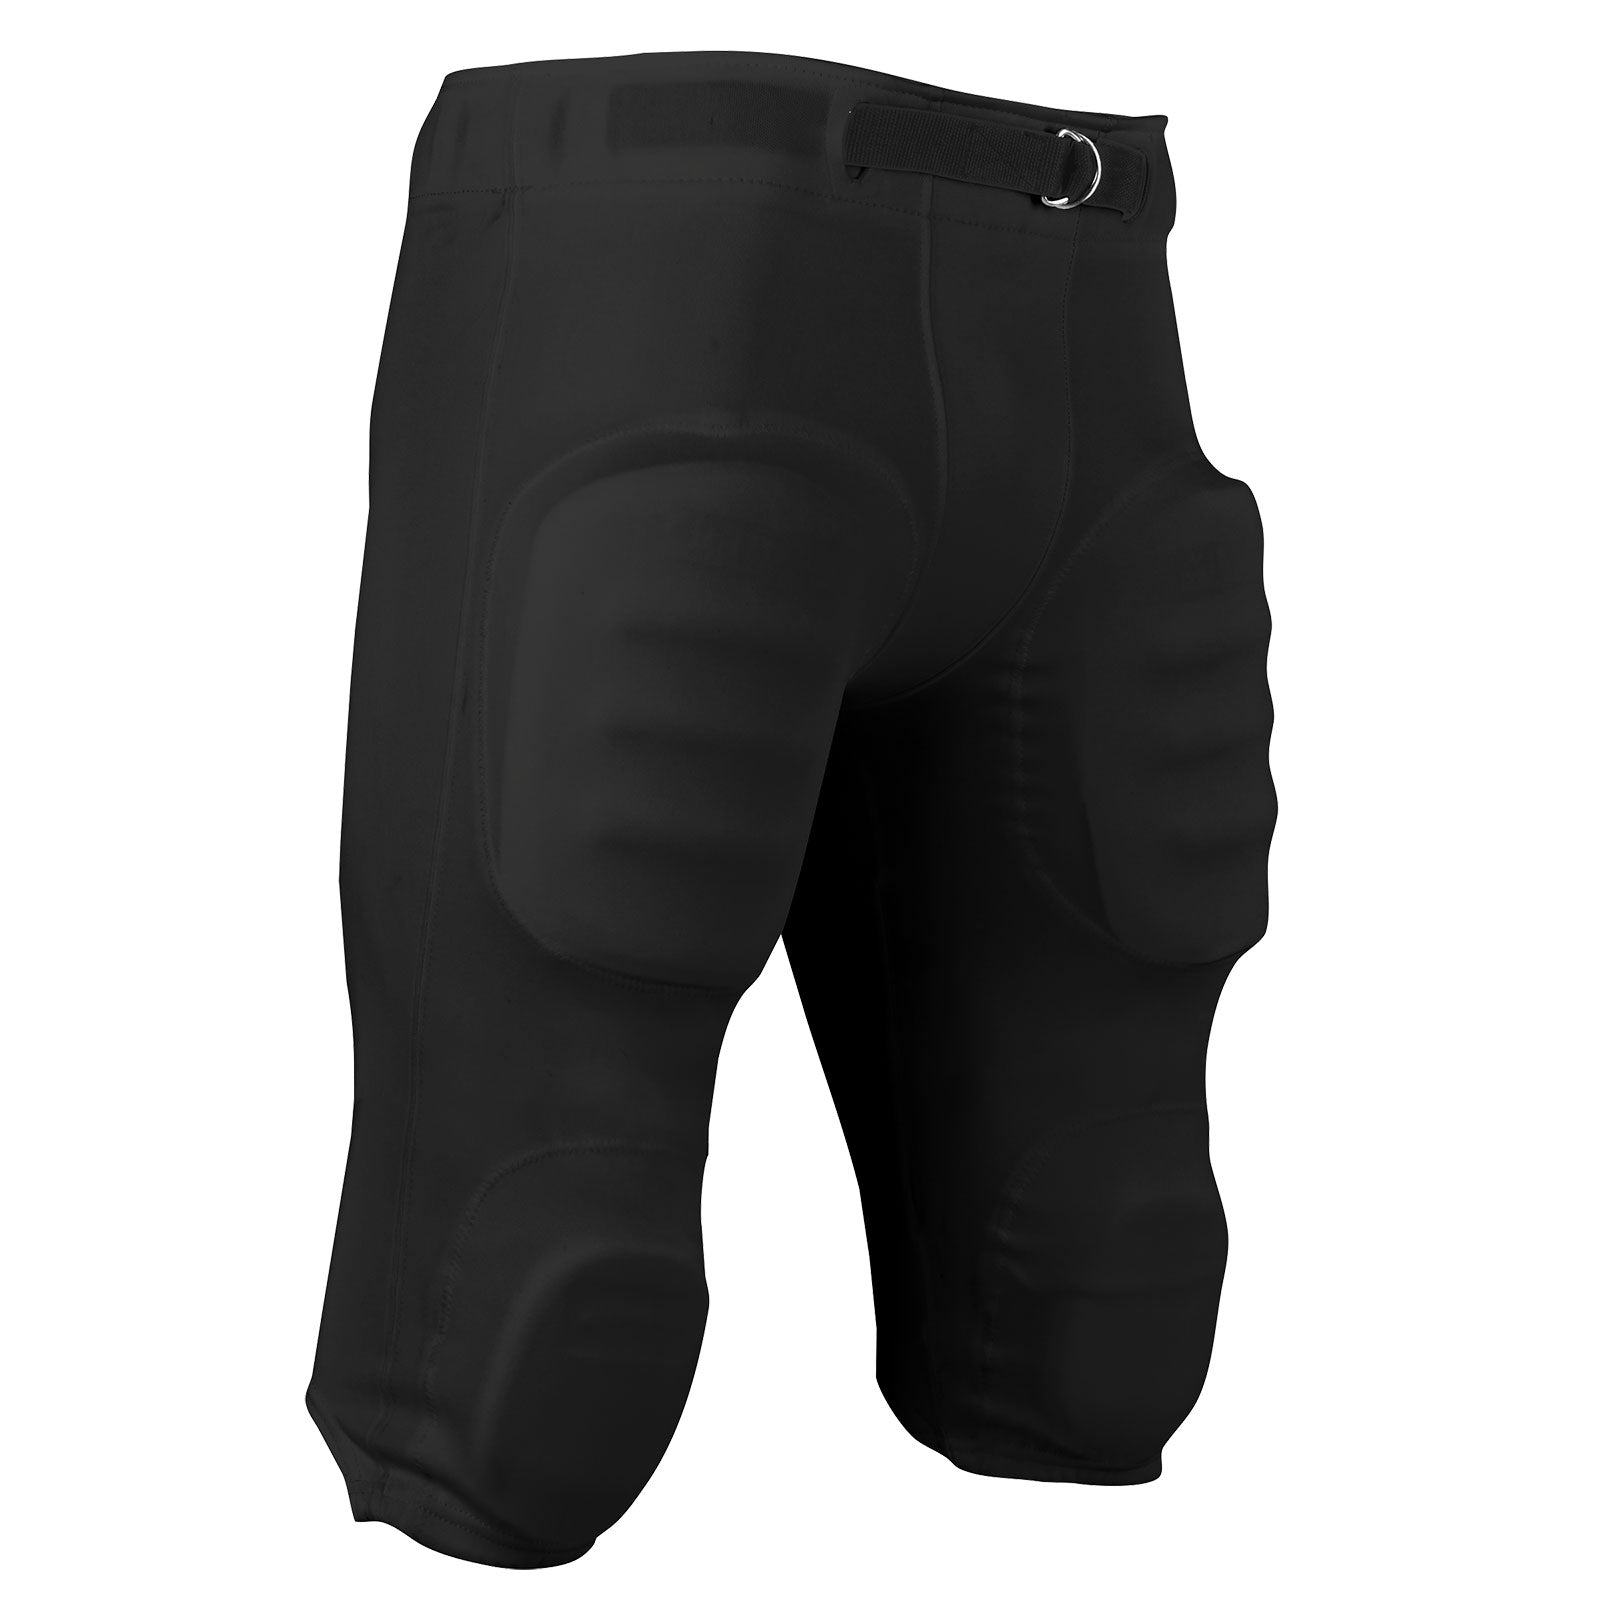 Double Knit Football Practice Pant With Pad Pockets BLACK BODY